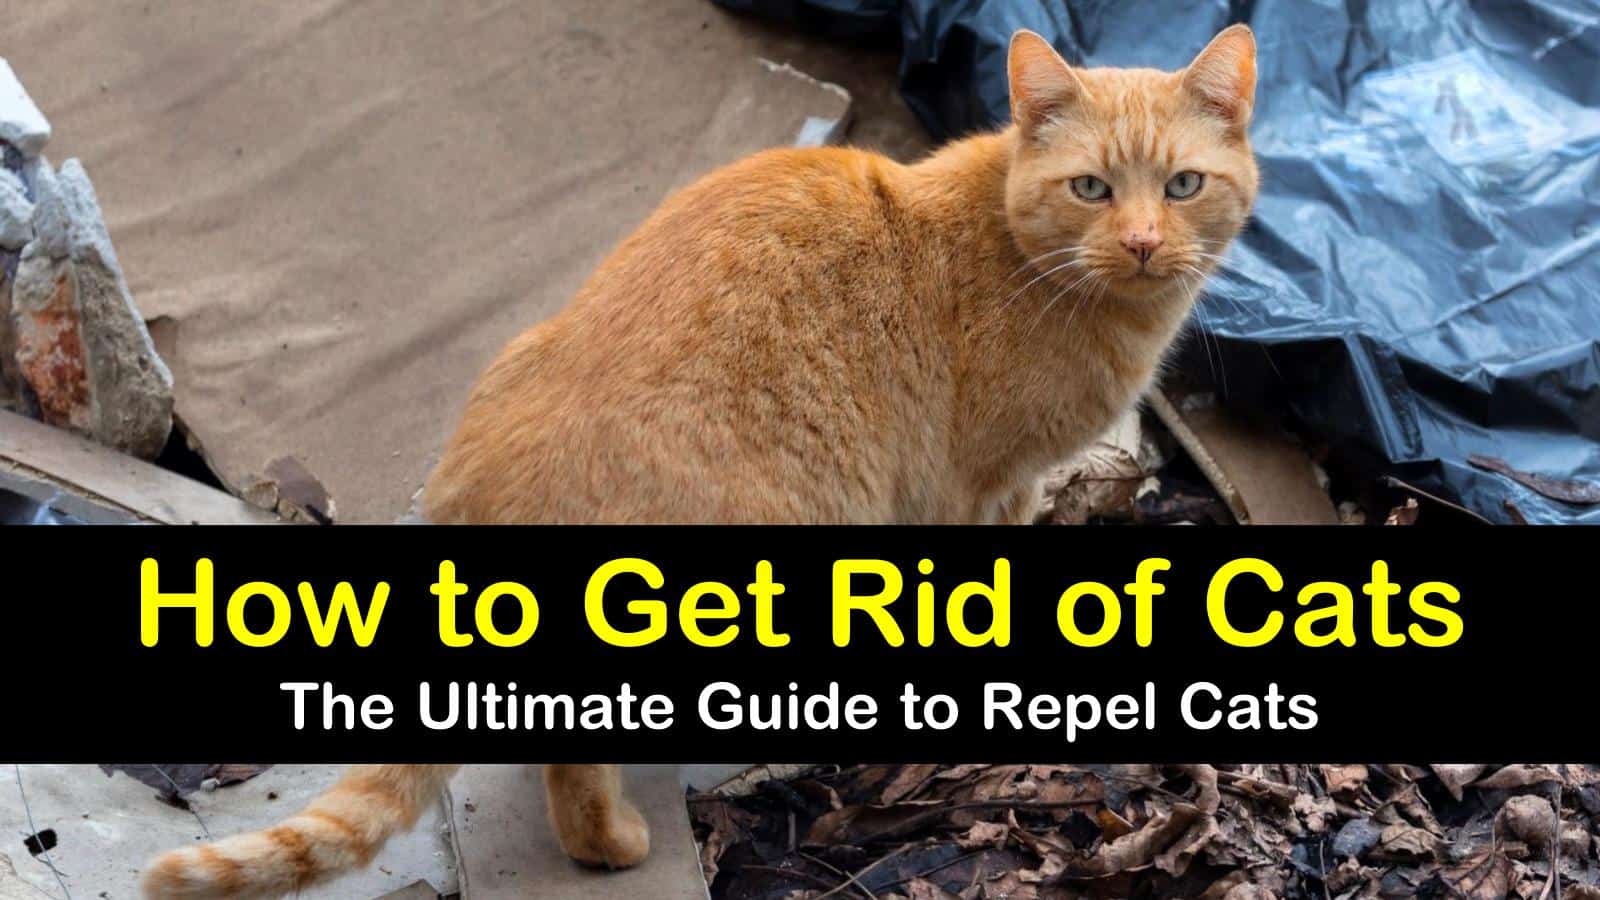 How to Get Rid of Cats